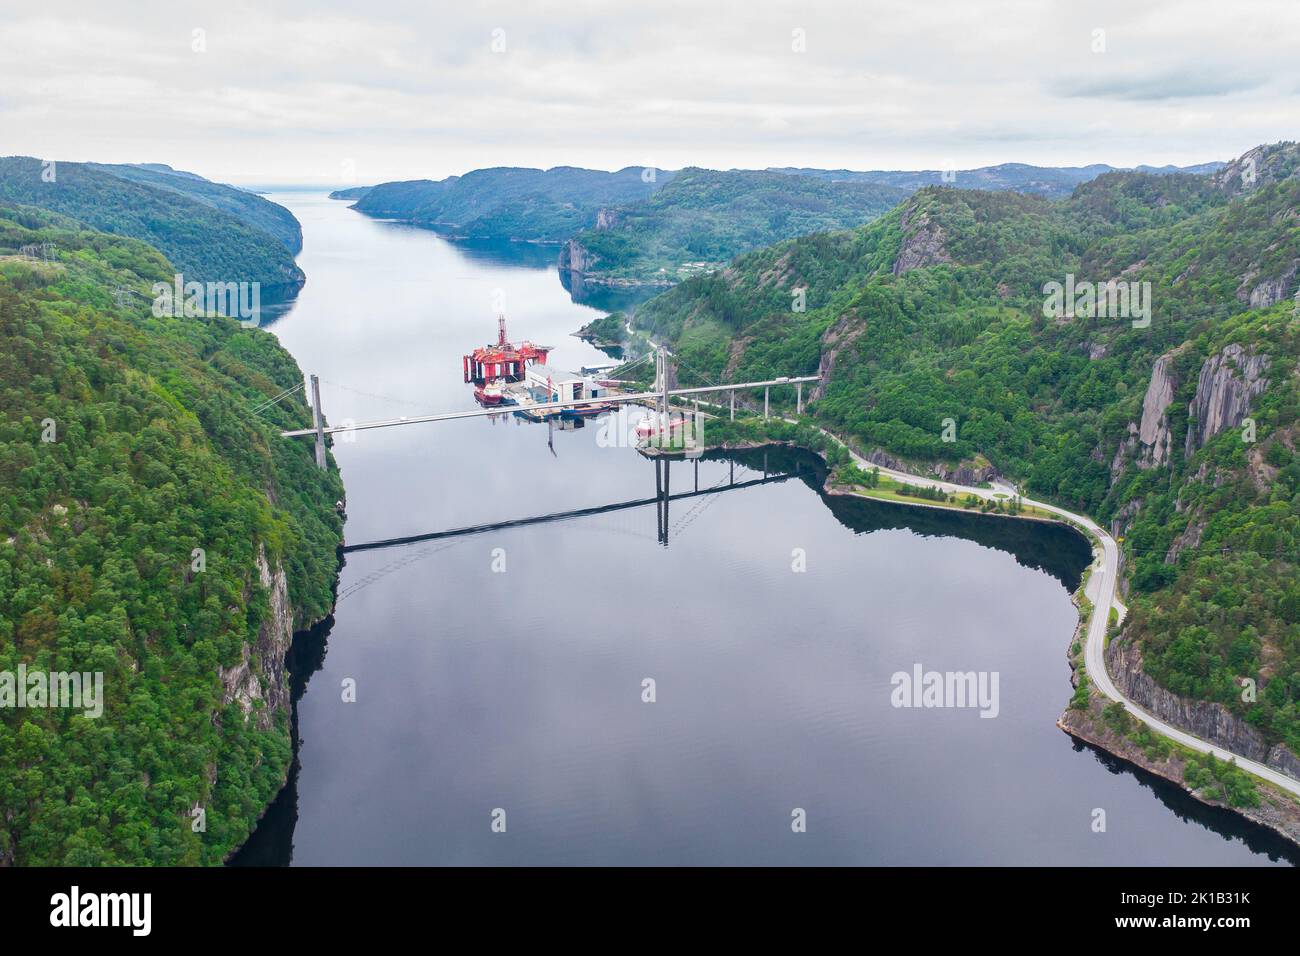 Aerial view of the Fedafjorden bru bridge crossing a fjord in Norway Stock Photo